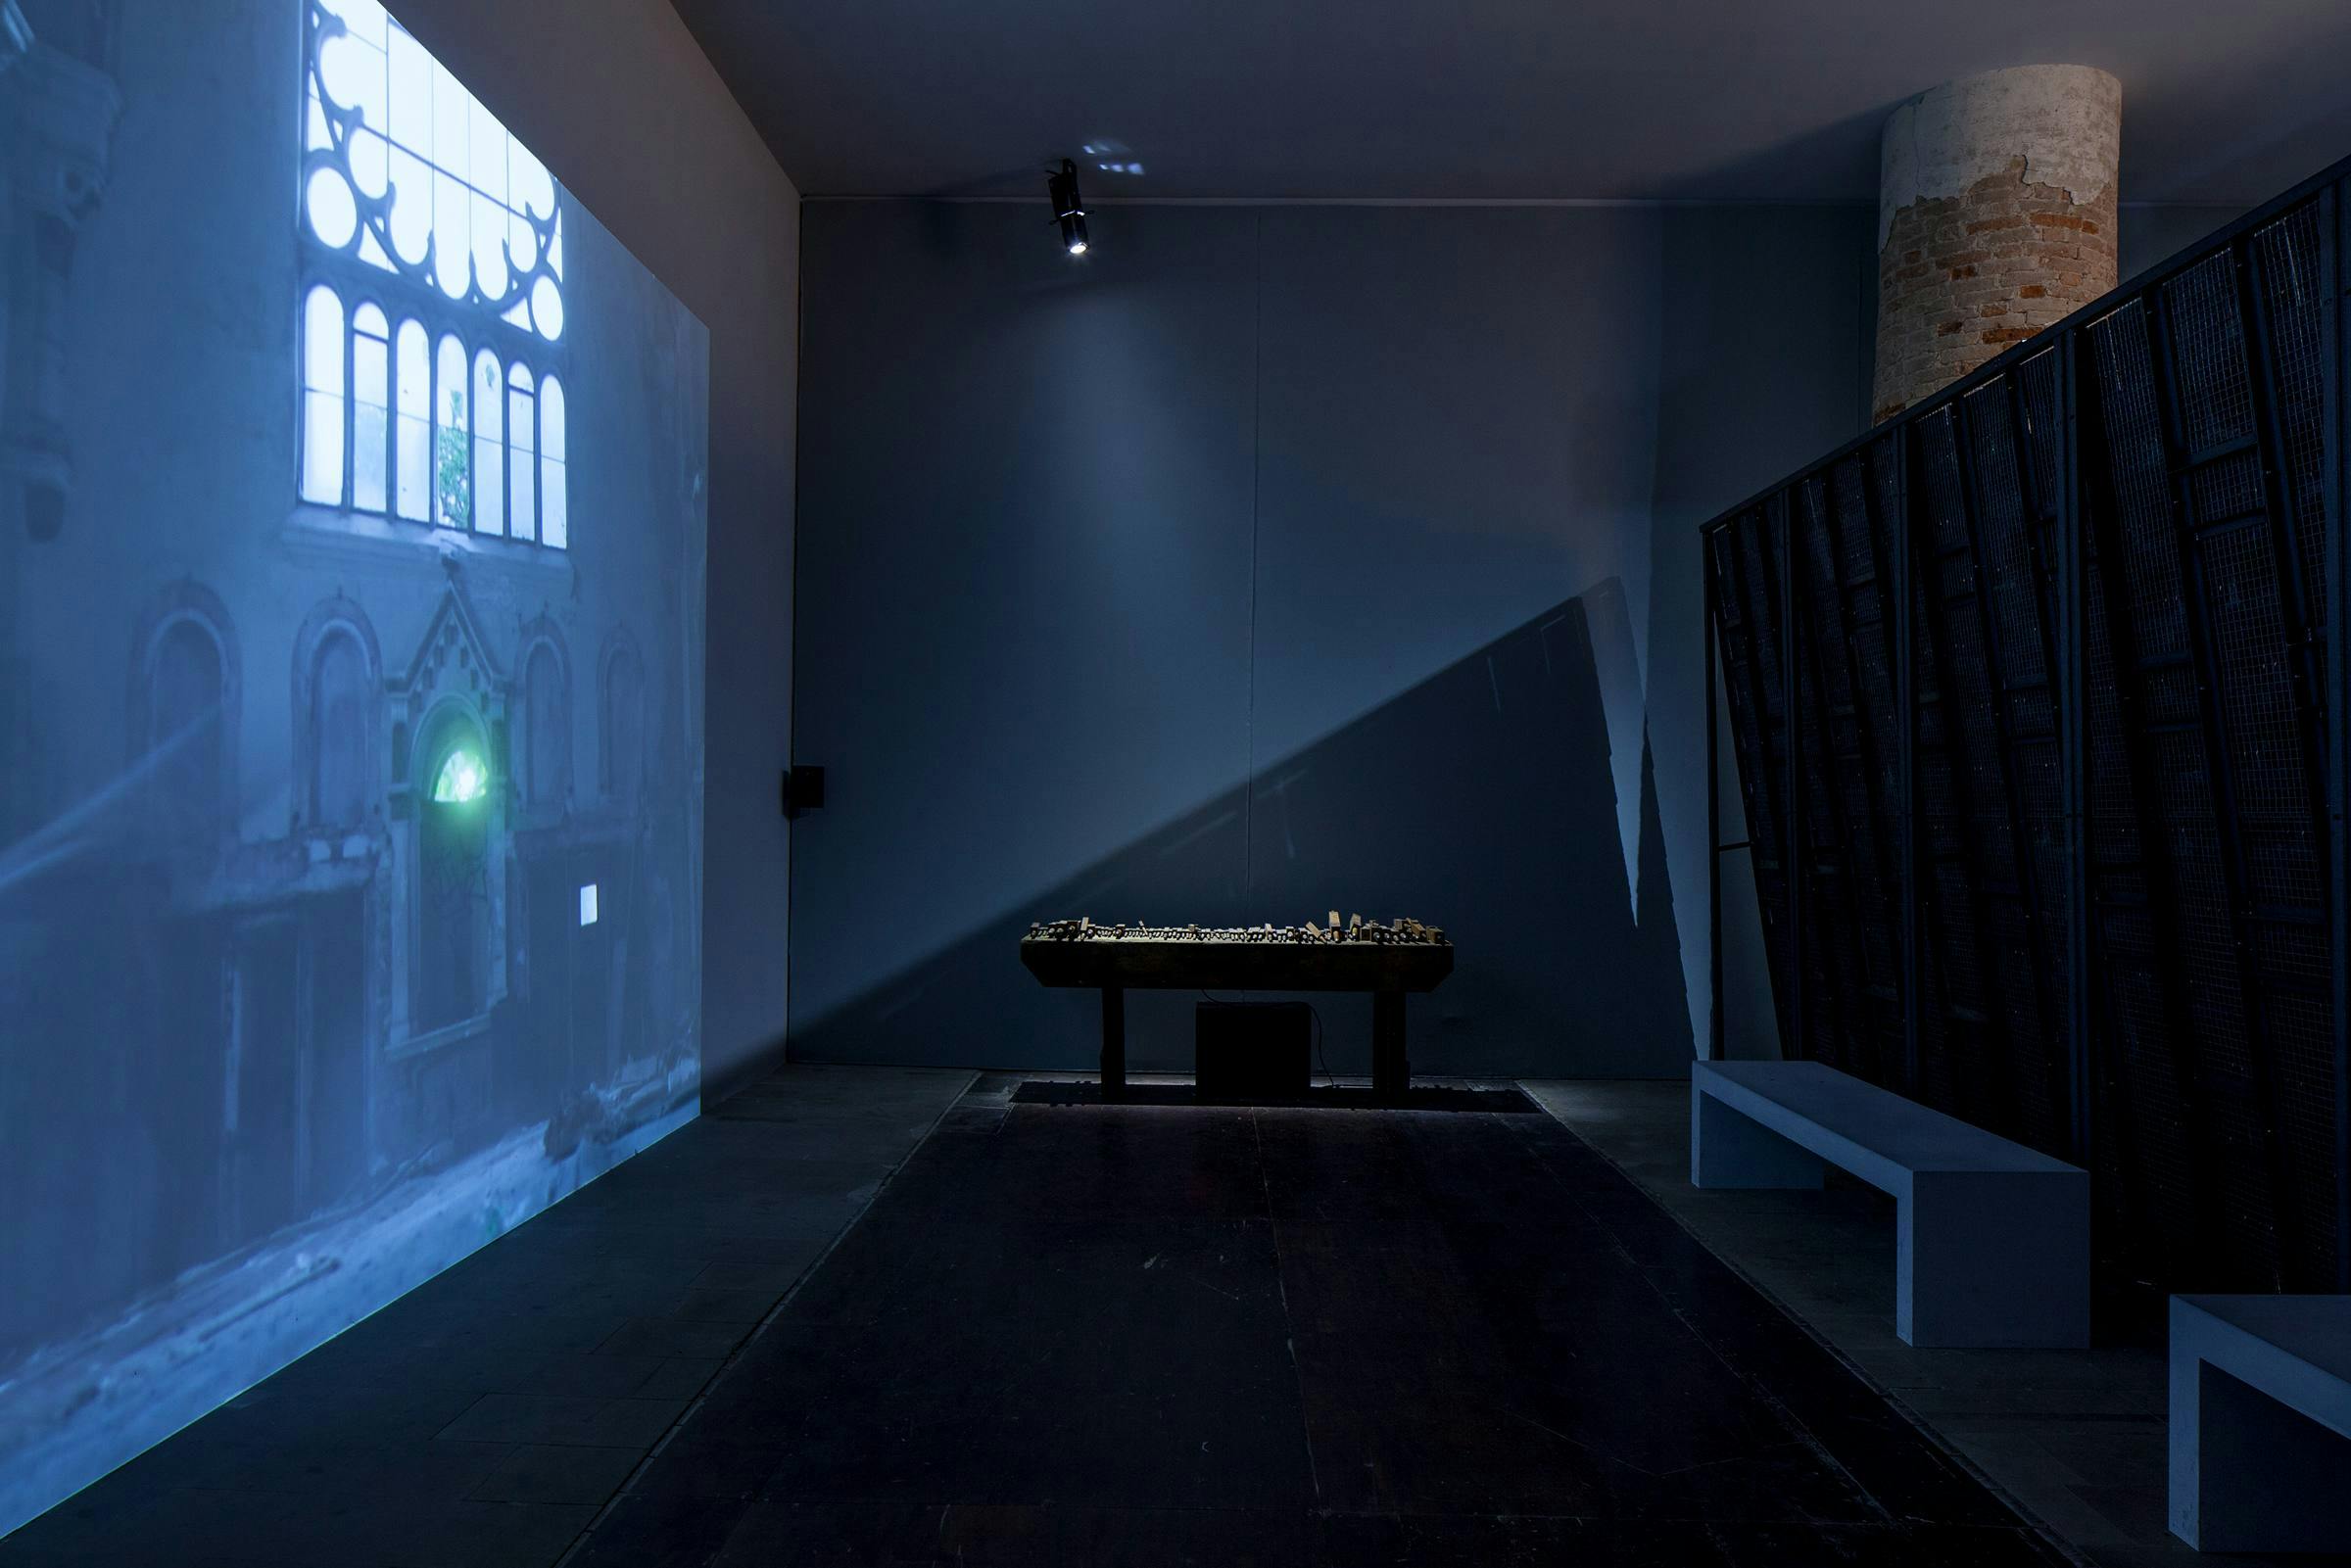 Installation view, Theaster Gates, Gone are the Days of Shelter and Martyr from 56th Venice Viennale, All the World's Futures, 9 May - 22 November 2015, Venice, Italy. Here we can see the beam of light the projector throws onto the wall